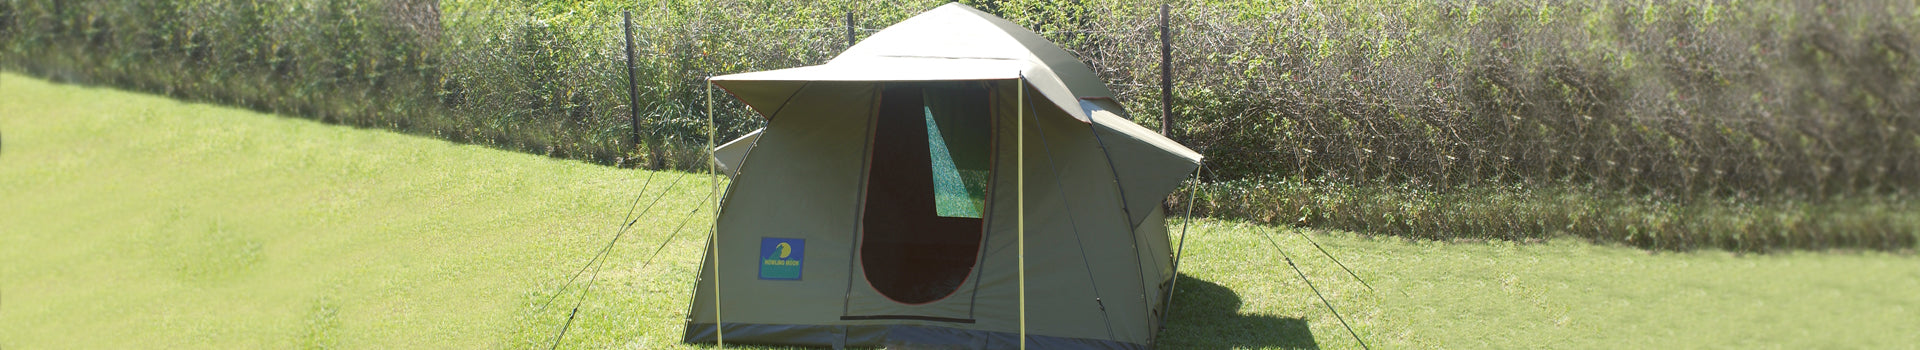 Howling Moon Dome Tents